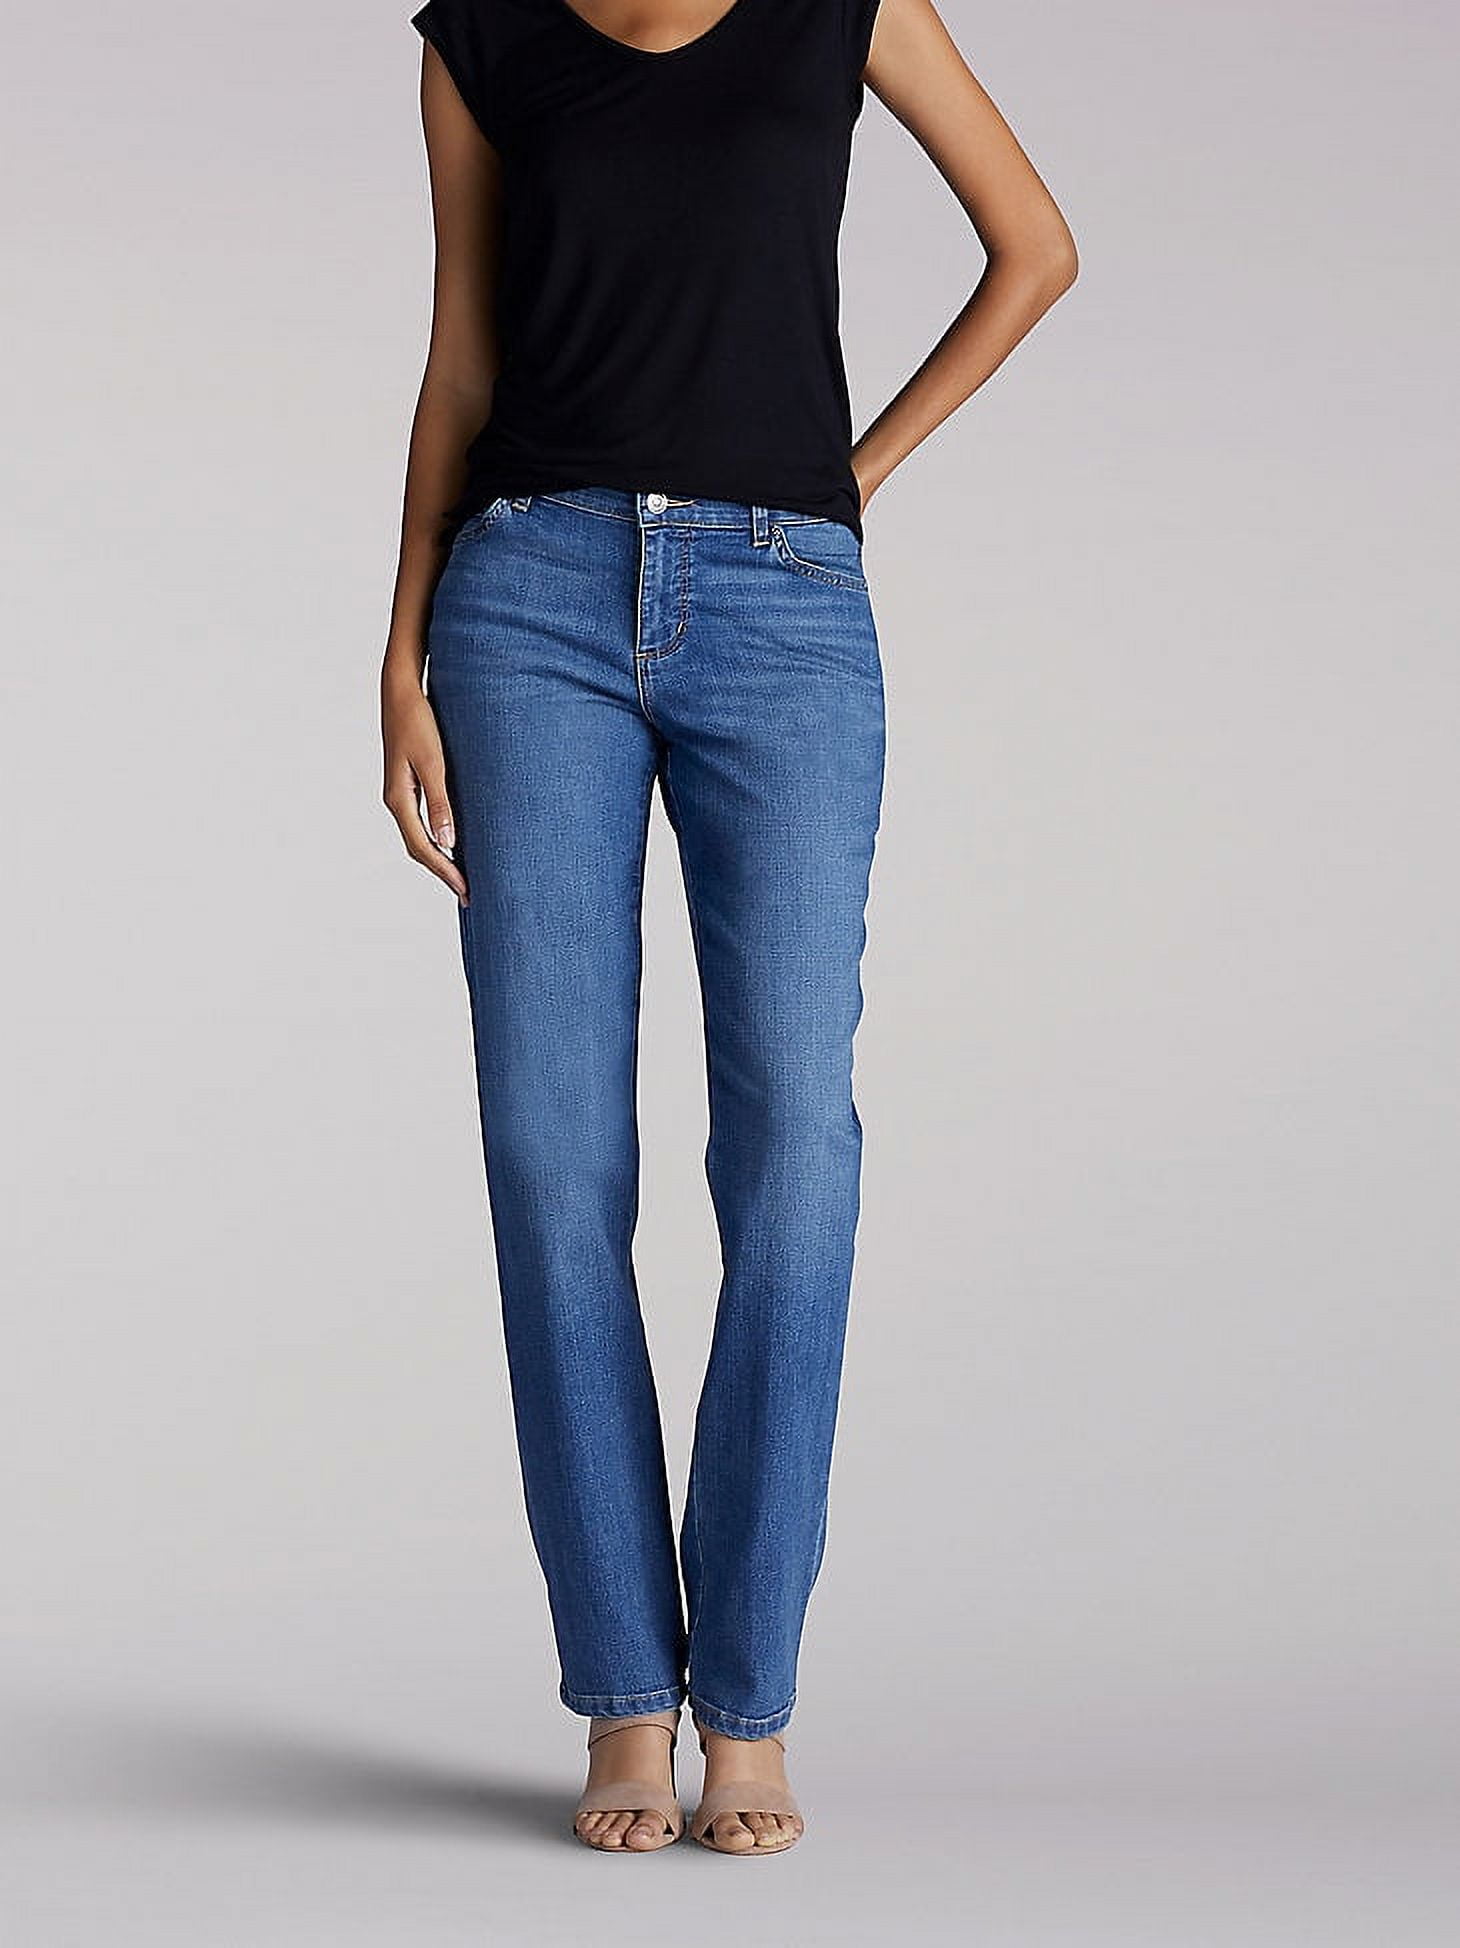 Womens Stretch Relaxed Fit Straight Leg Jean (Petite) in Meridian ...